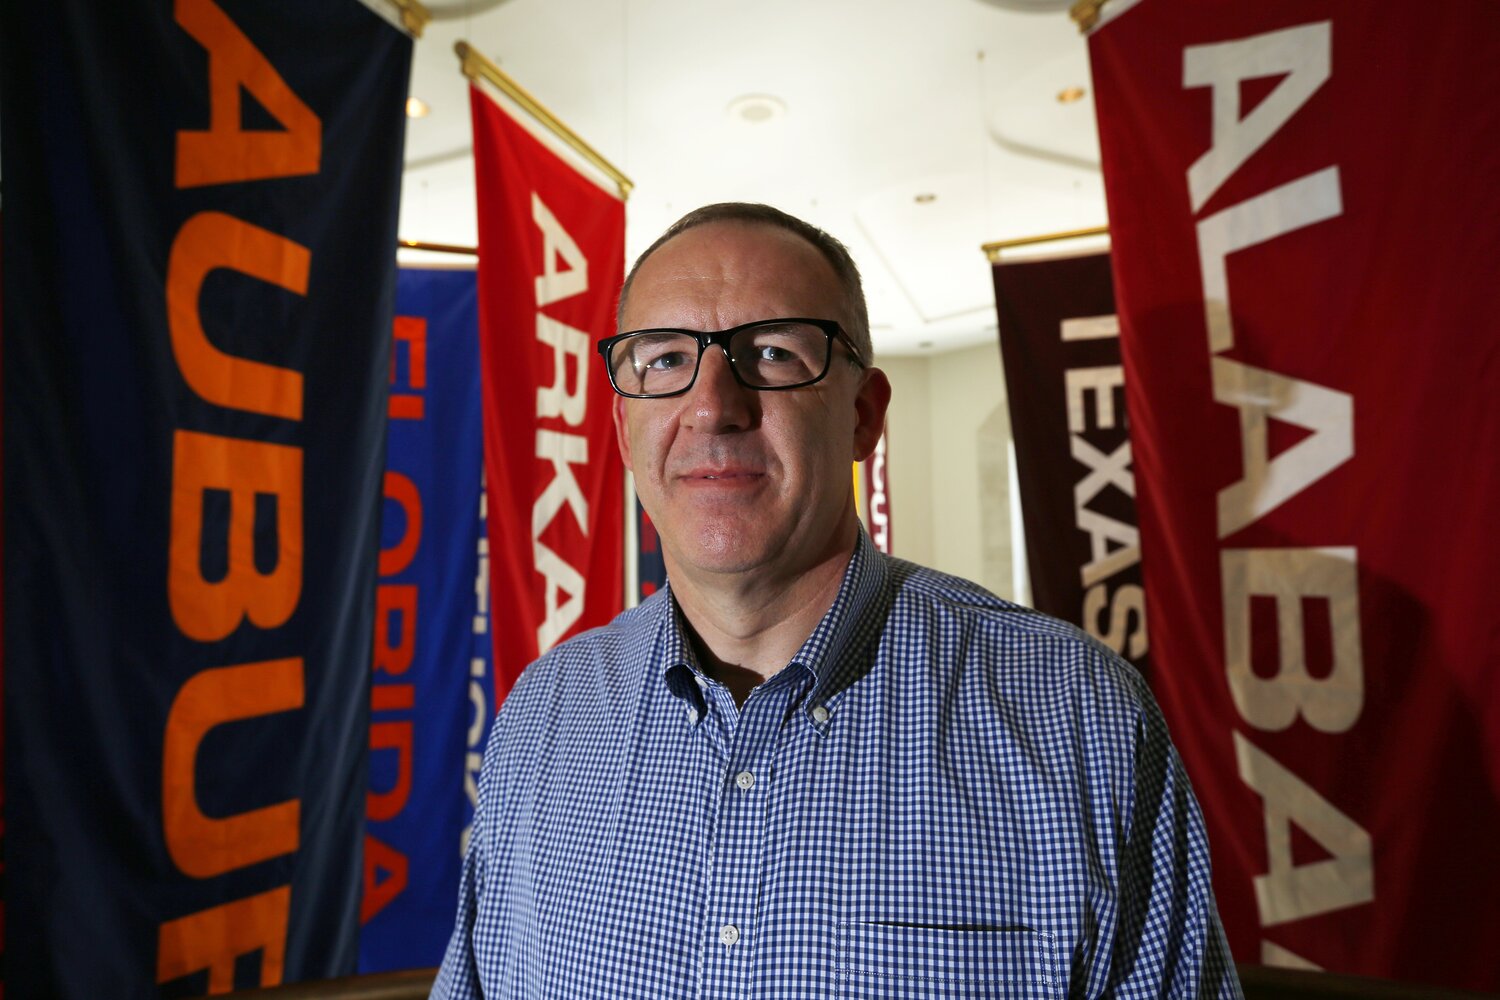 Southeastern Conference Commissioner Greg Sankey, shown in this file photo, was recently back in Utica where he worked for two years in the late 1980s.